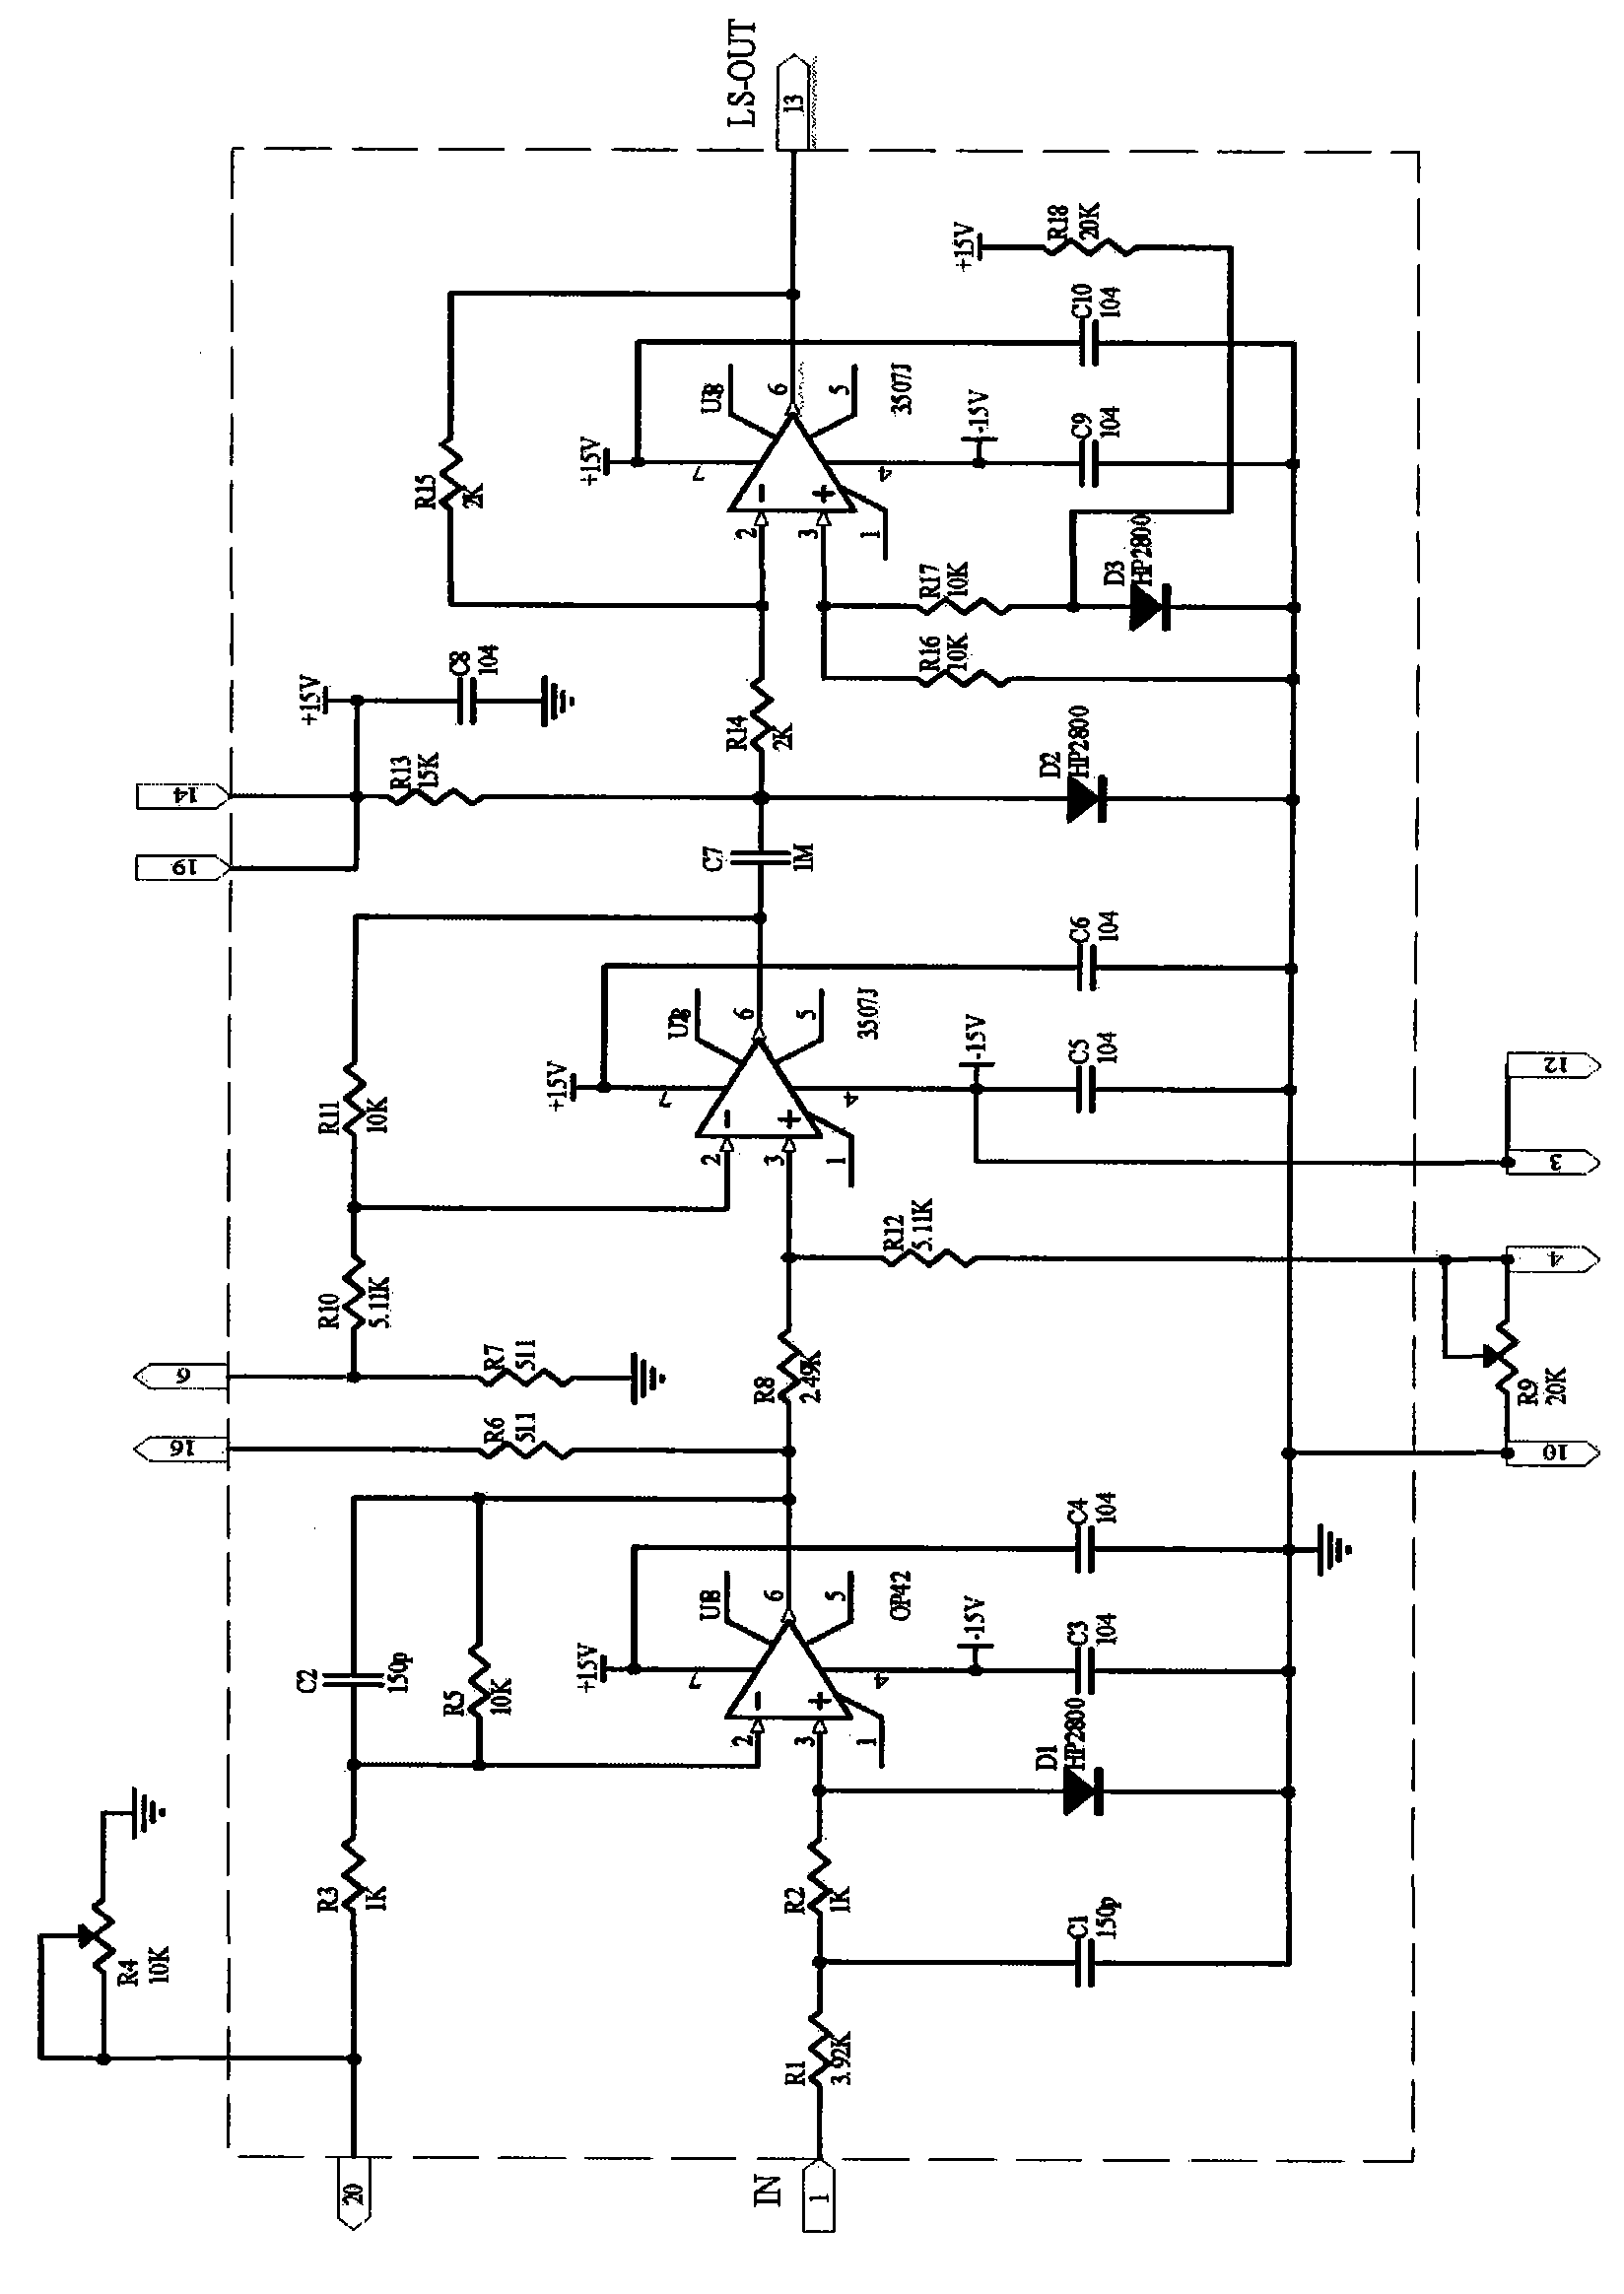 Lithologic density long-spacing data acquisition and processing thick film circuit